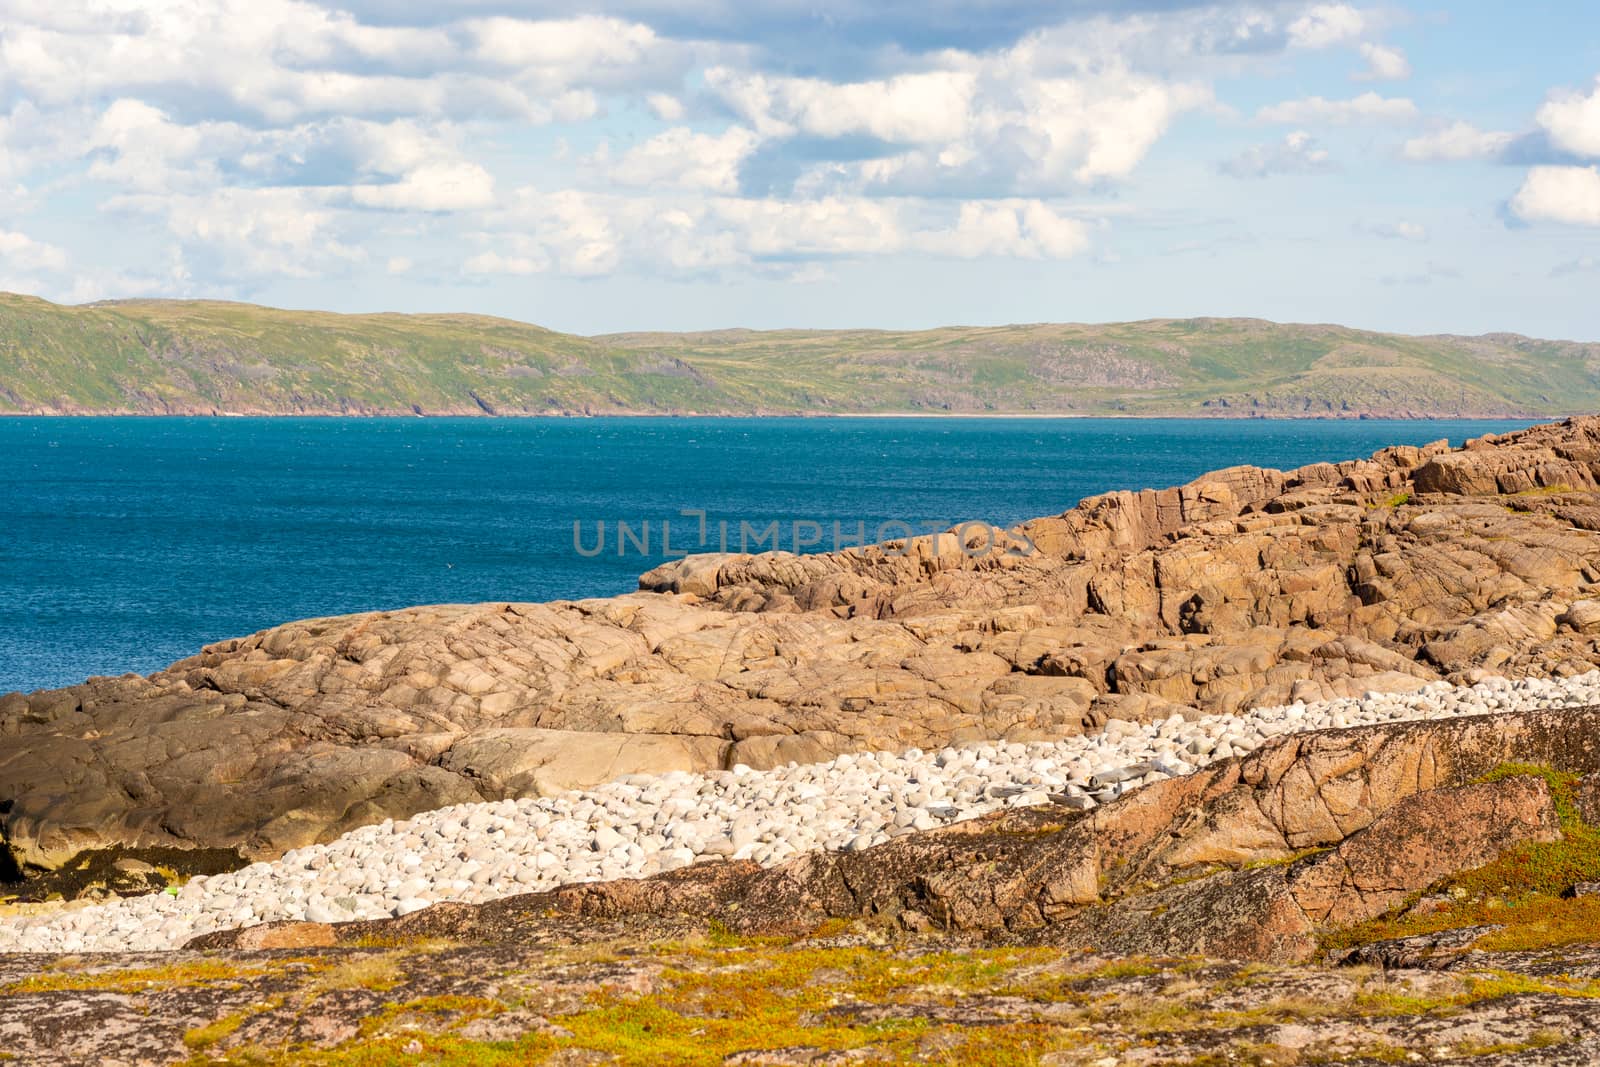 Summer seascape overlooking the Barents sea. Bright Northern colors shimmer under the rays of the day sun. Rural and peaceful landscape